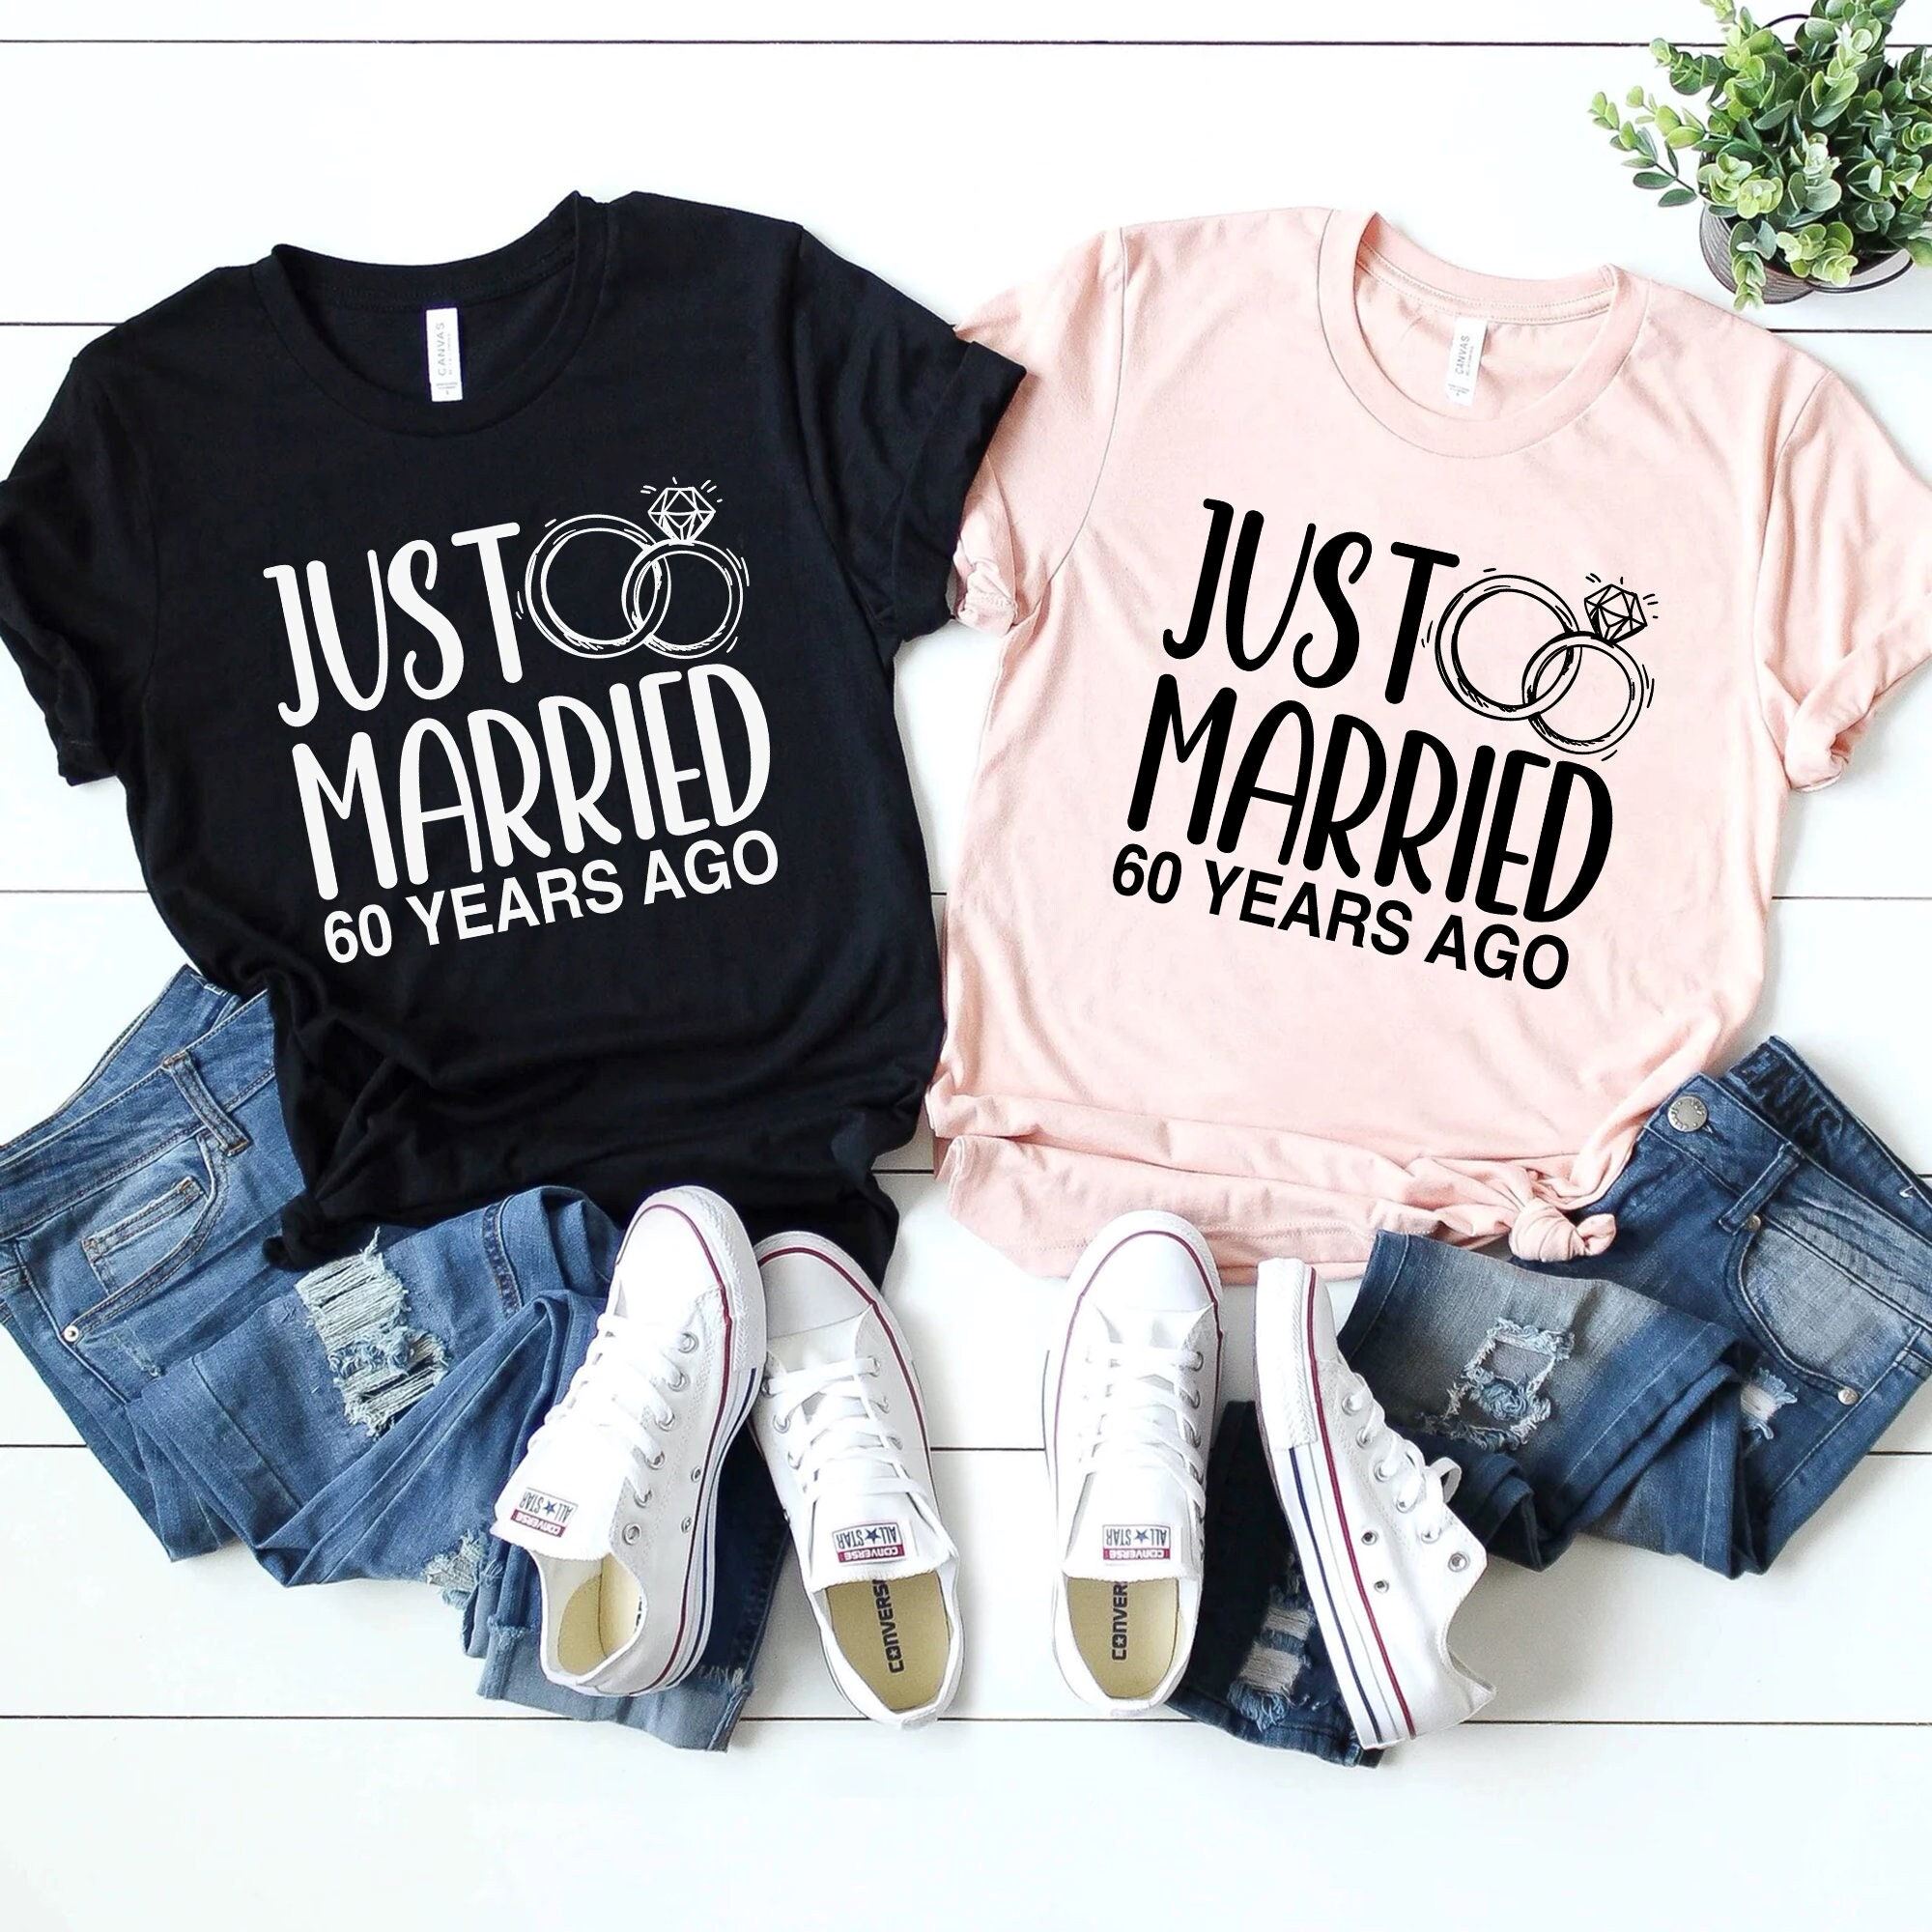 Promotions 60th Wedding Anniversary Shirts 60th Wedding Shirt Married 60 Years Mom Dad Mother Father Gift 60th Anniversary Gift T Shirtcouples Tee 